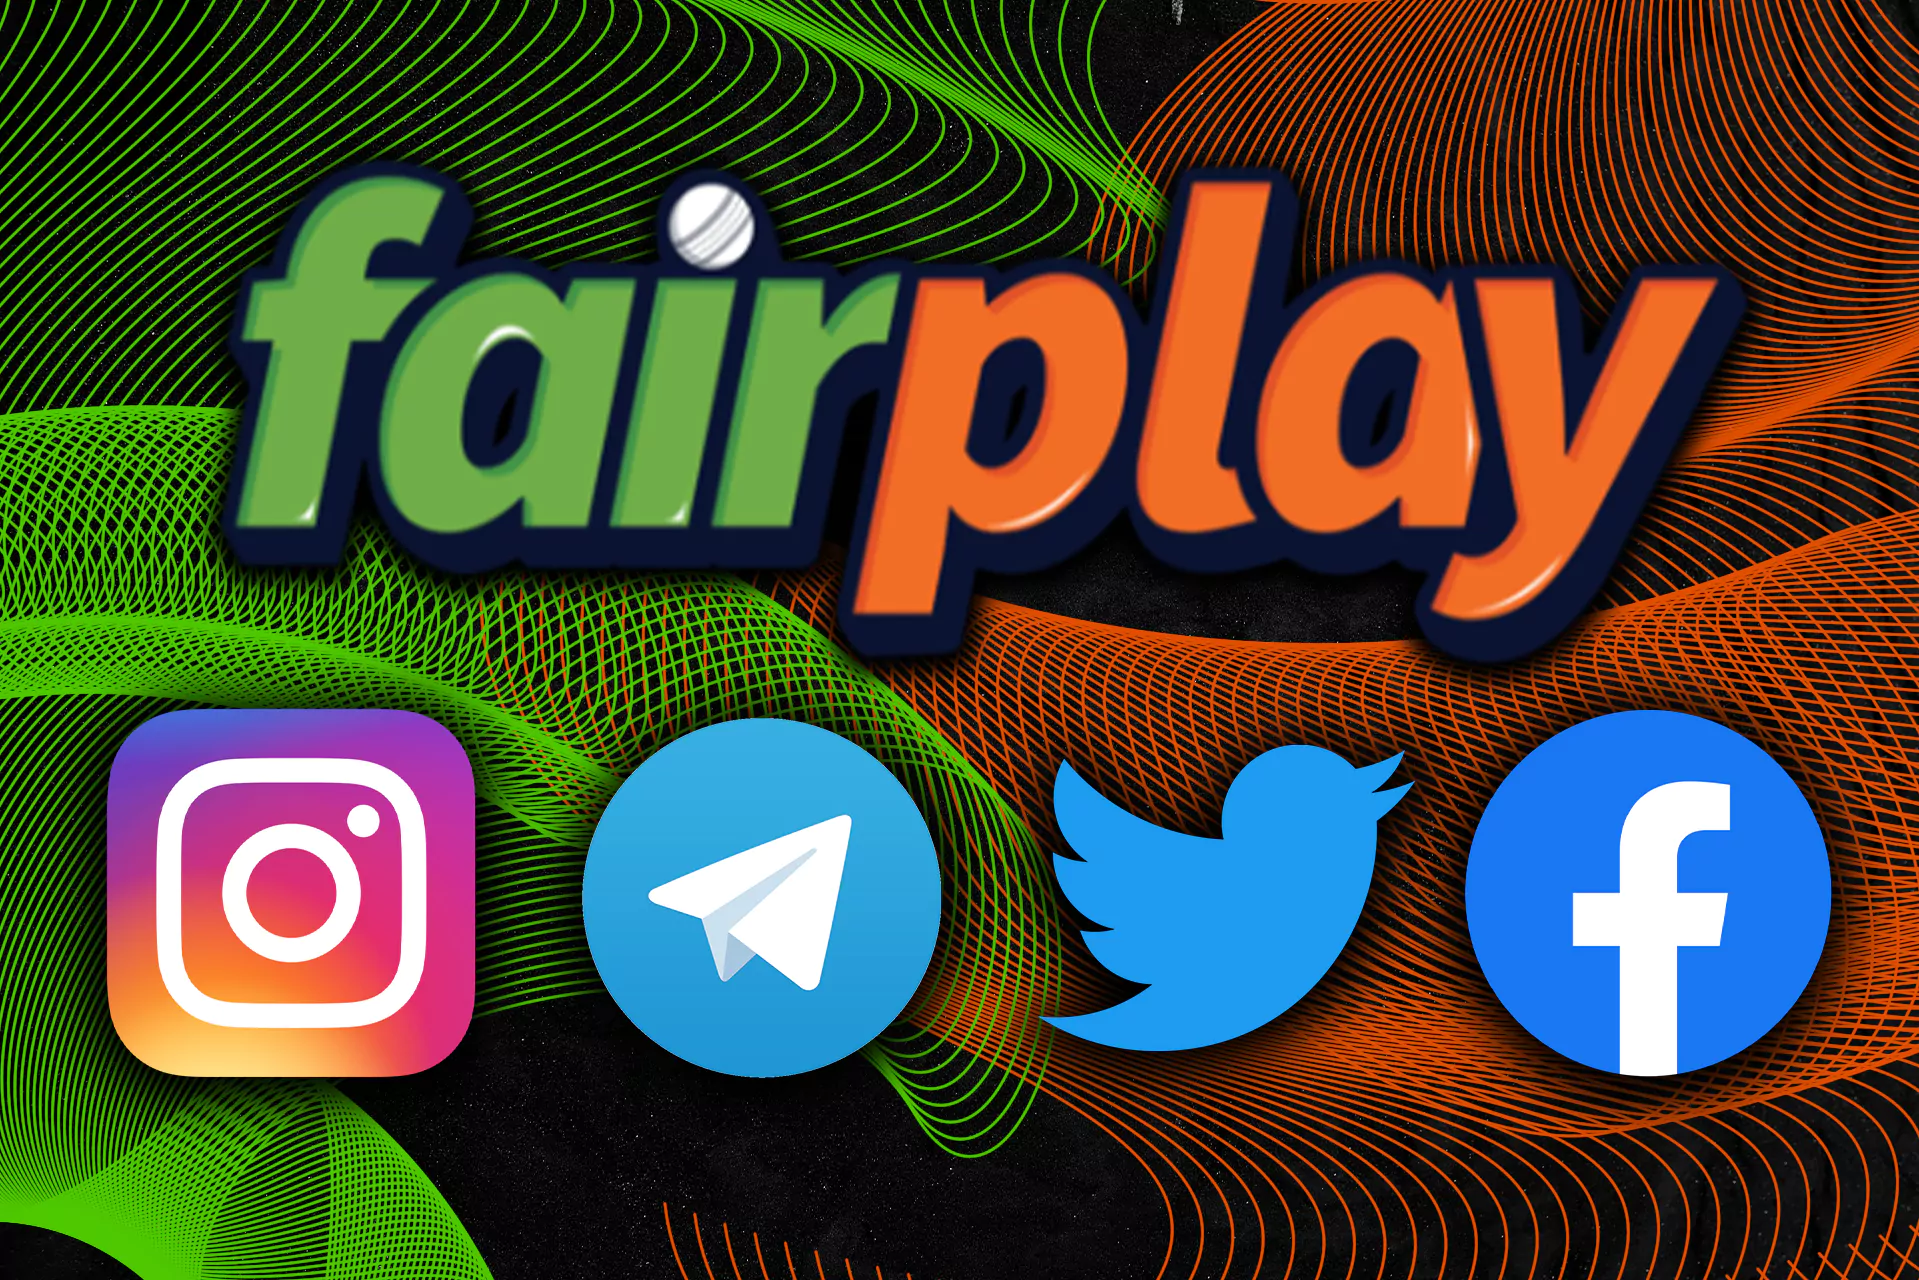 You can gather a lor of information from the Fairplay's social media.